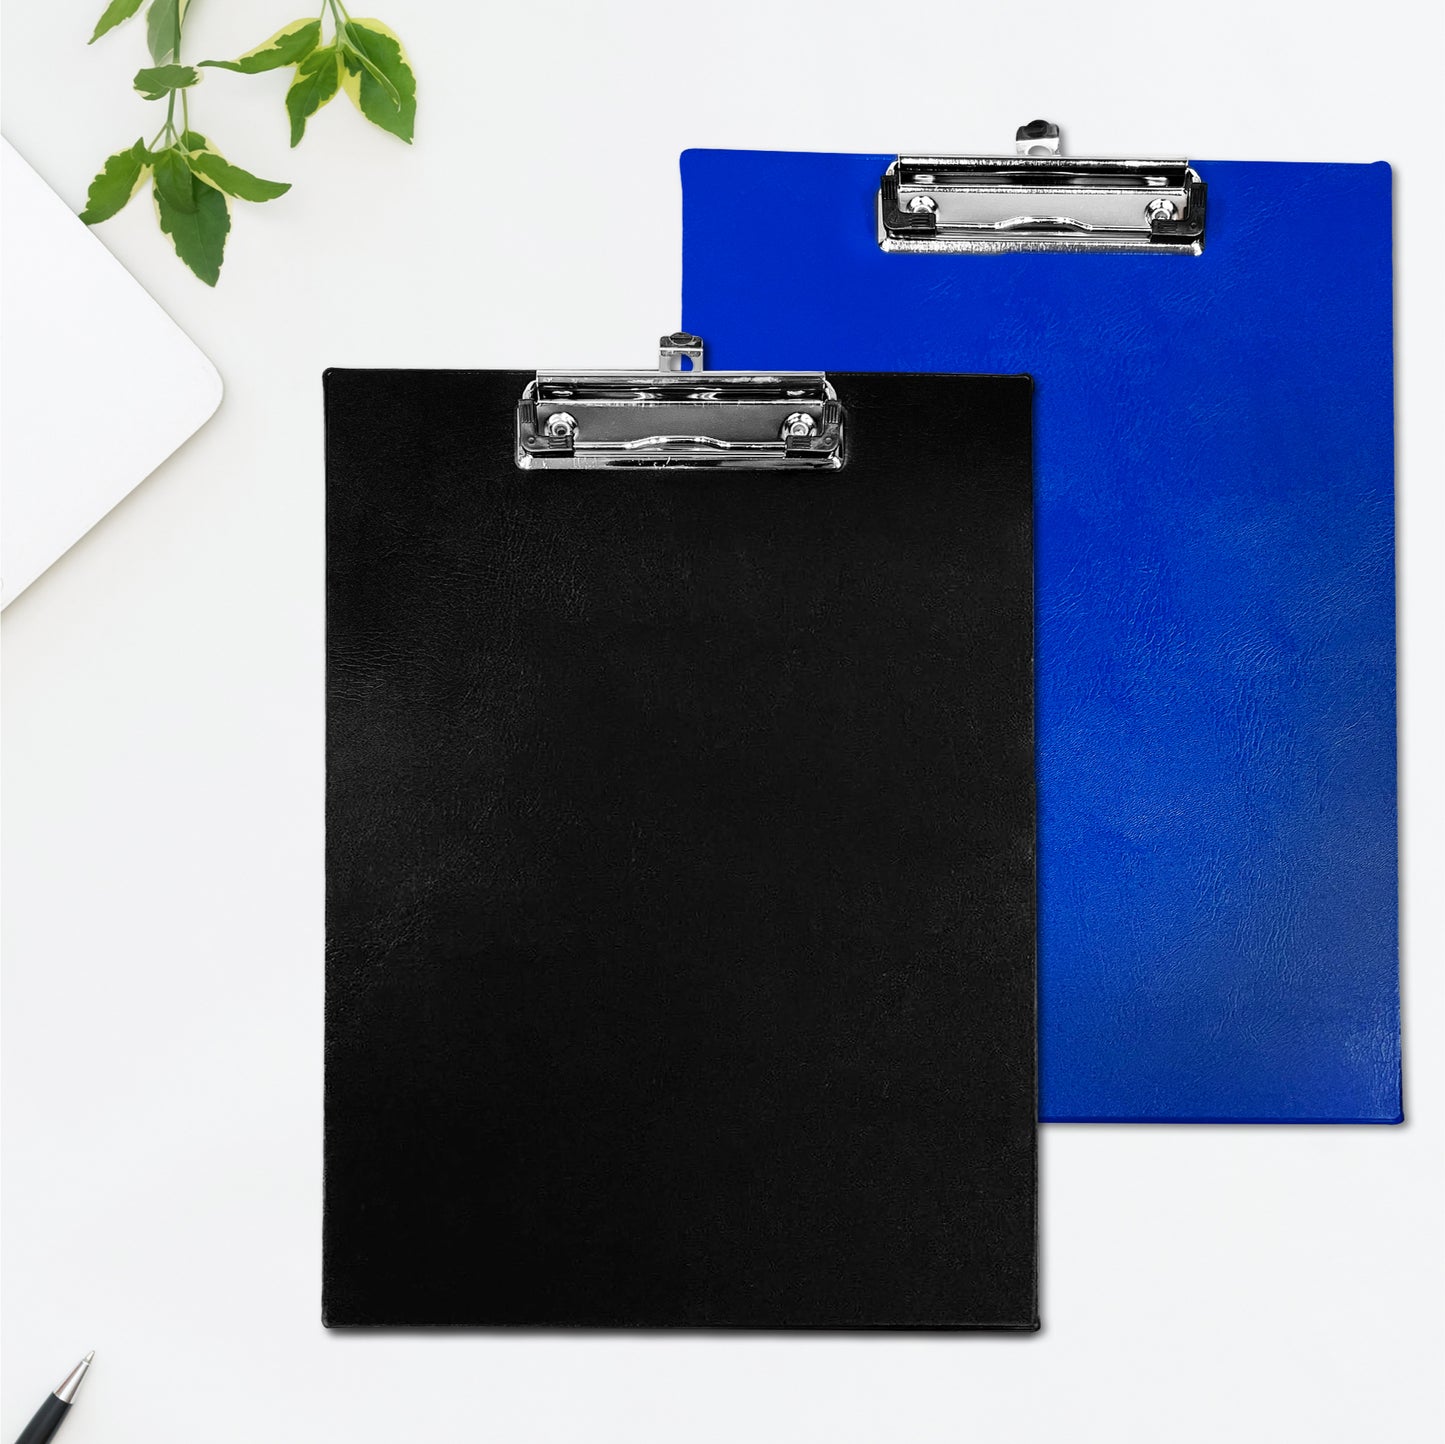 Pack of 10 Janrax A4 Blue PVC Single Clipboards